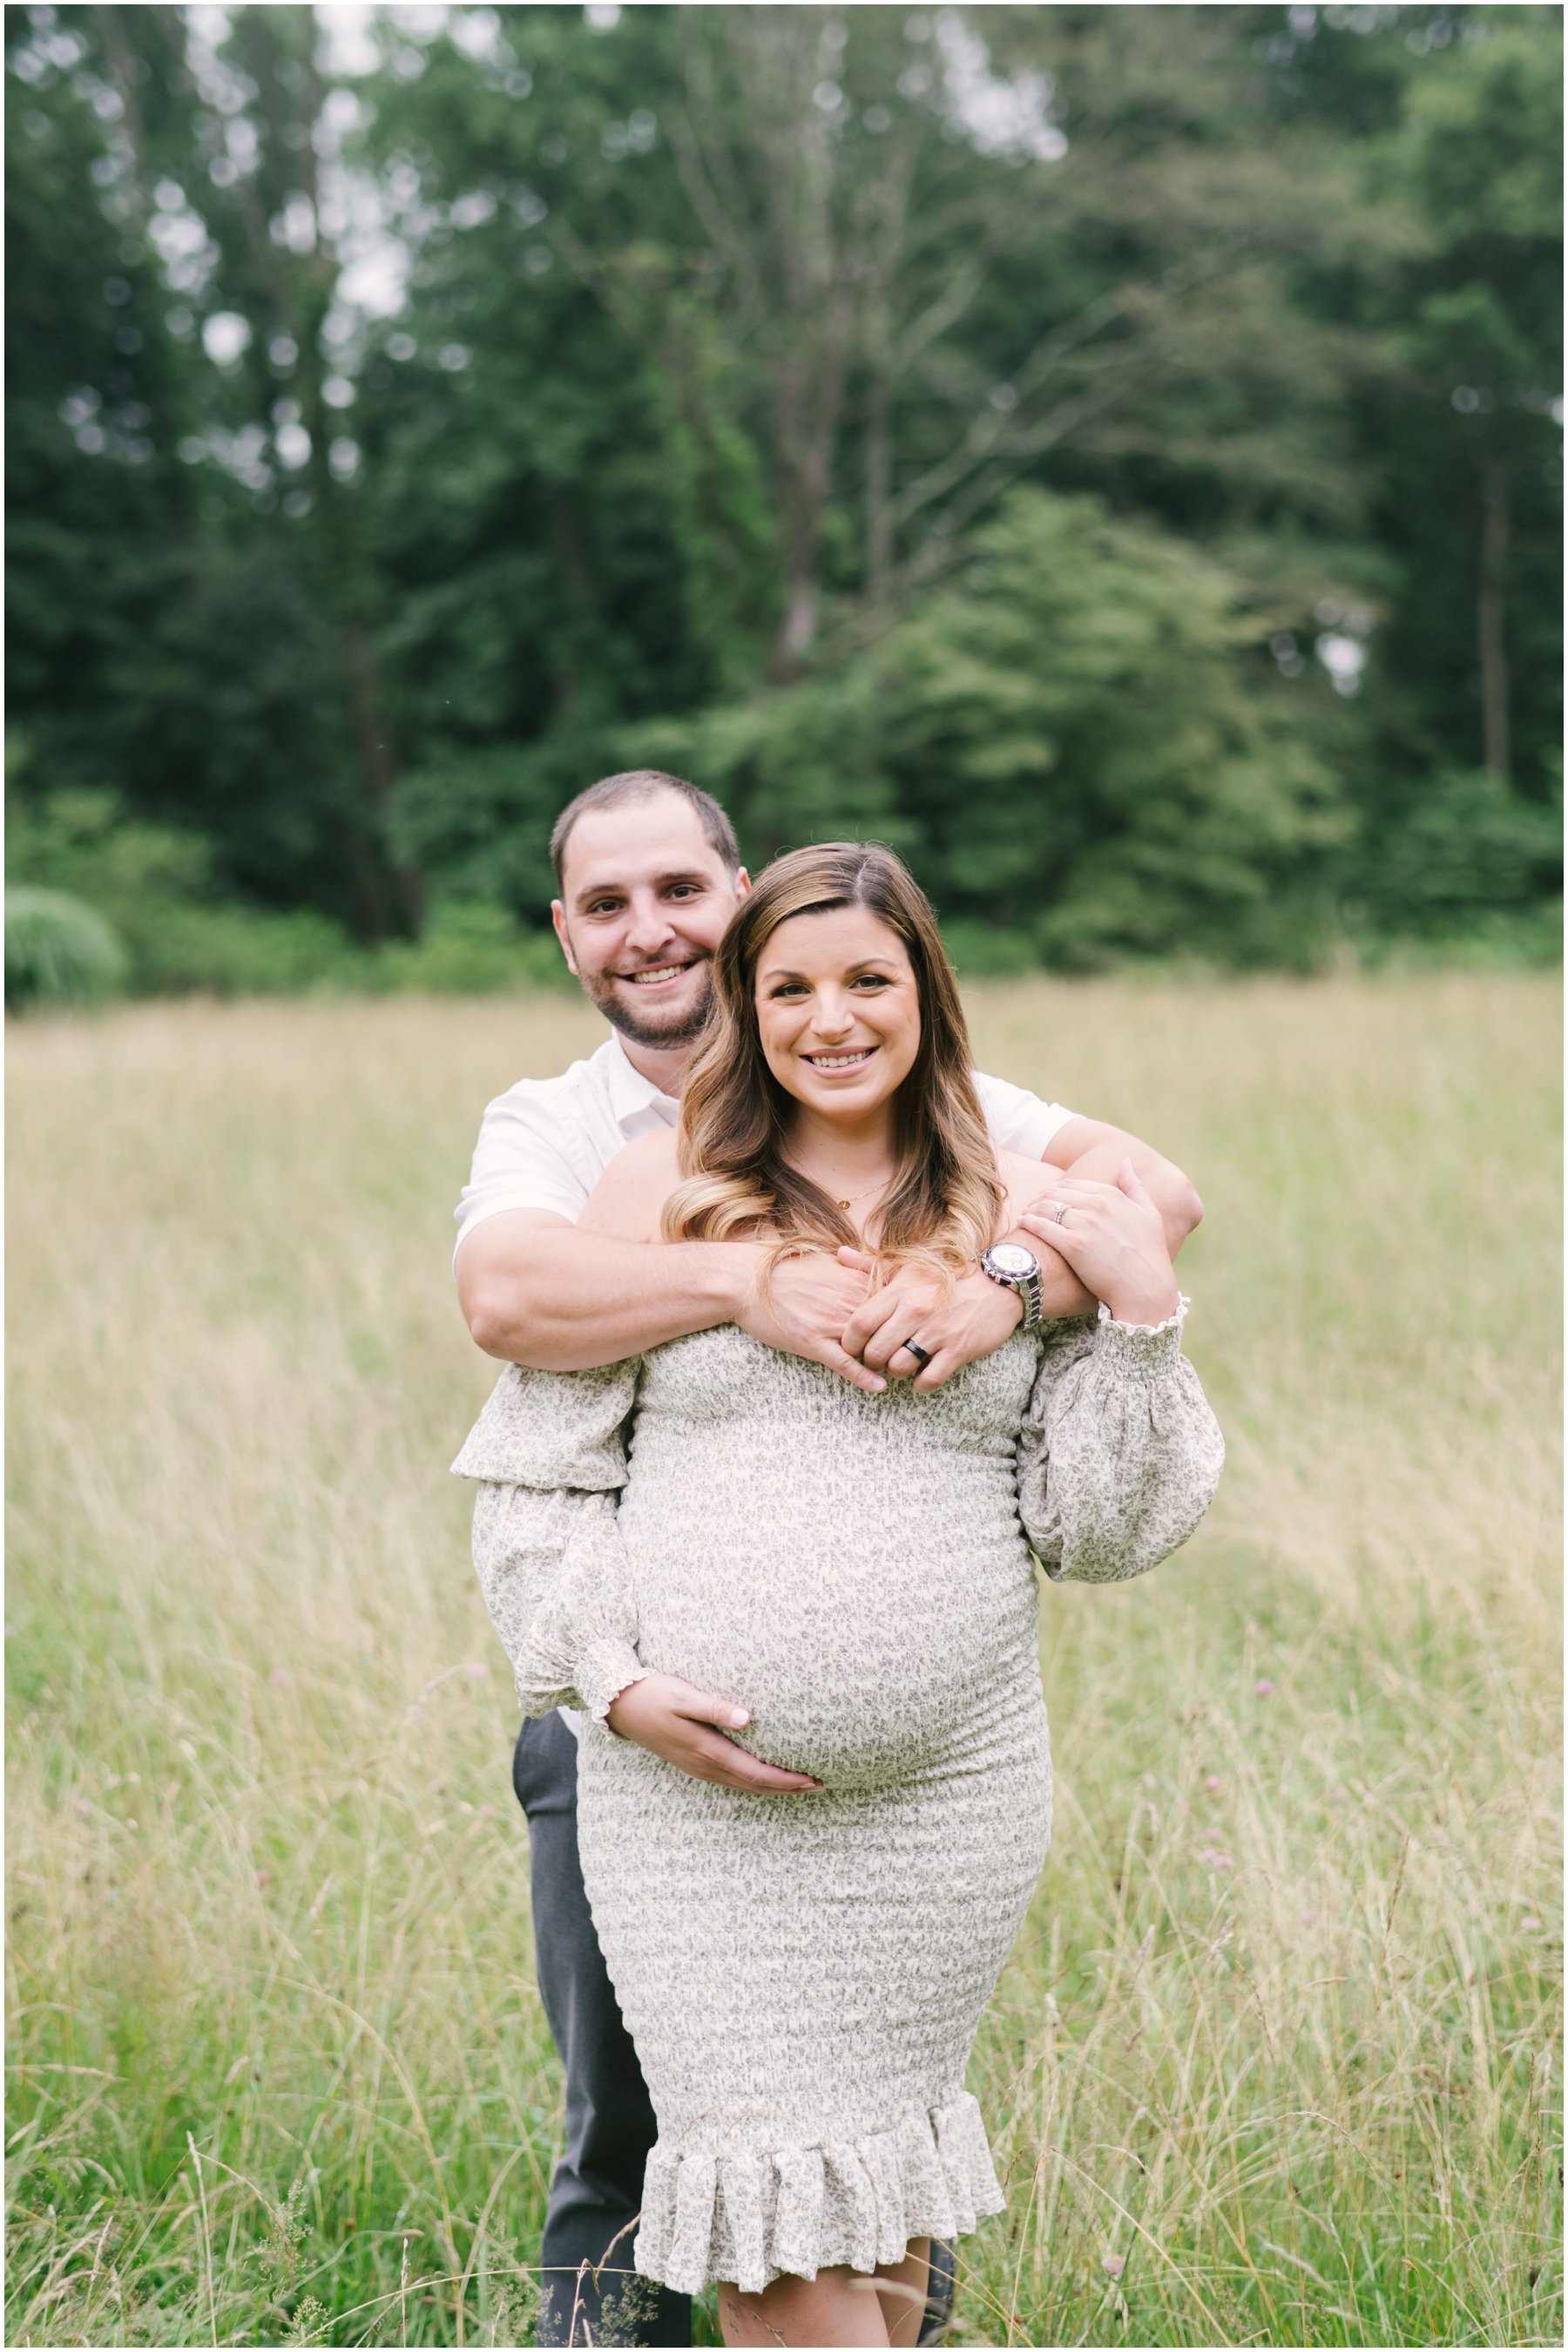 Man standing behind woman while she cradles pregnant belly during maternity session | NKB Photo